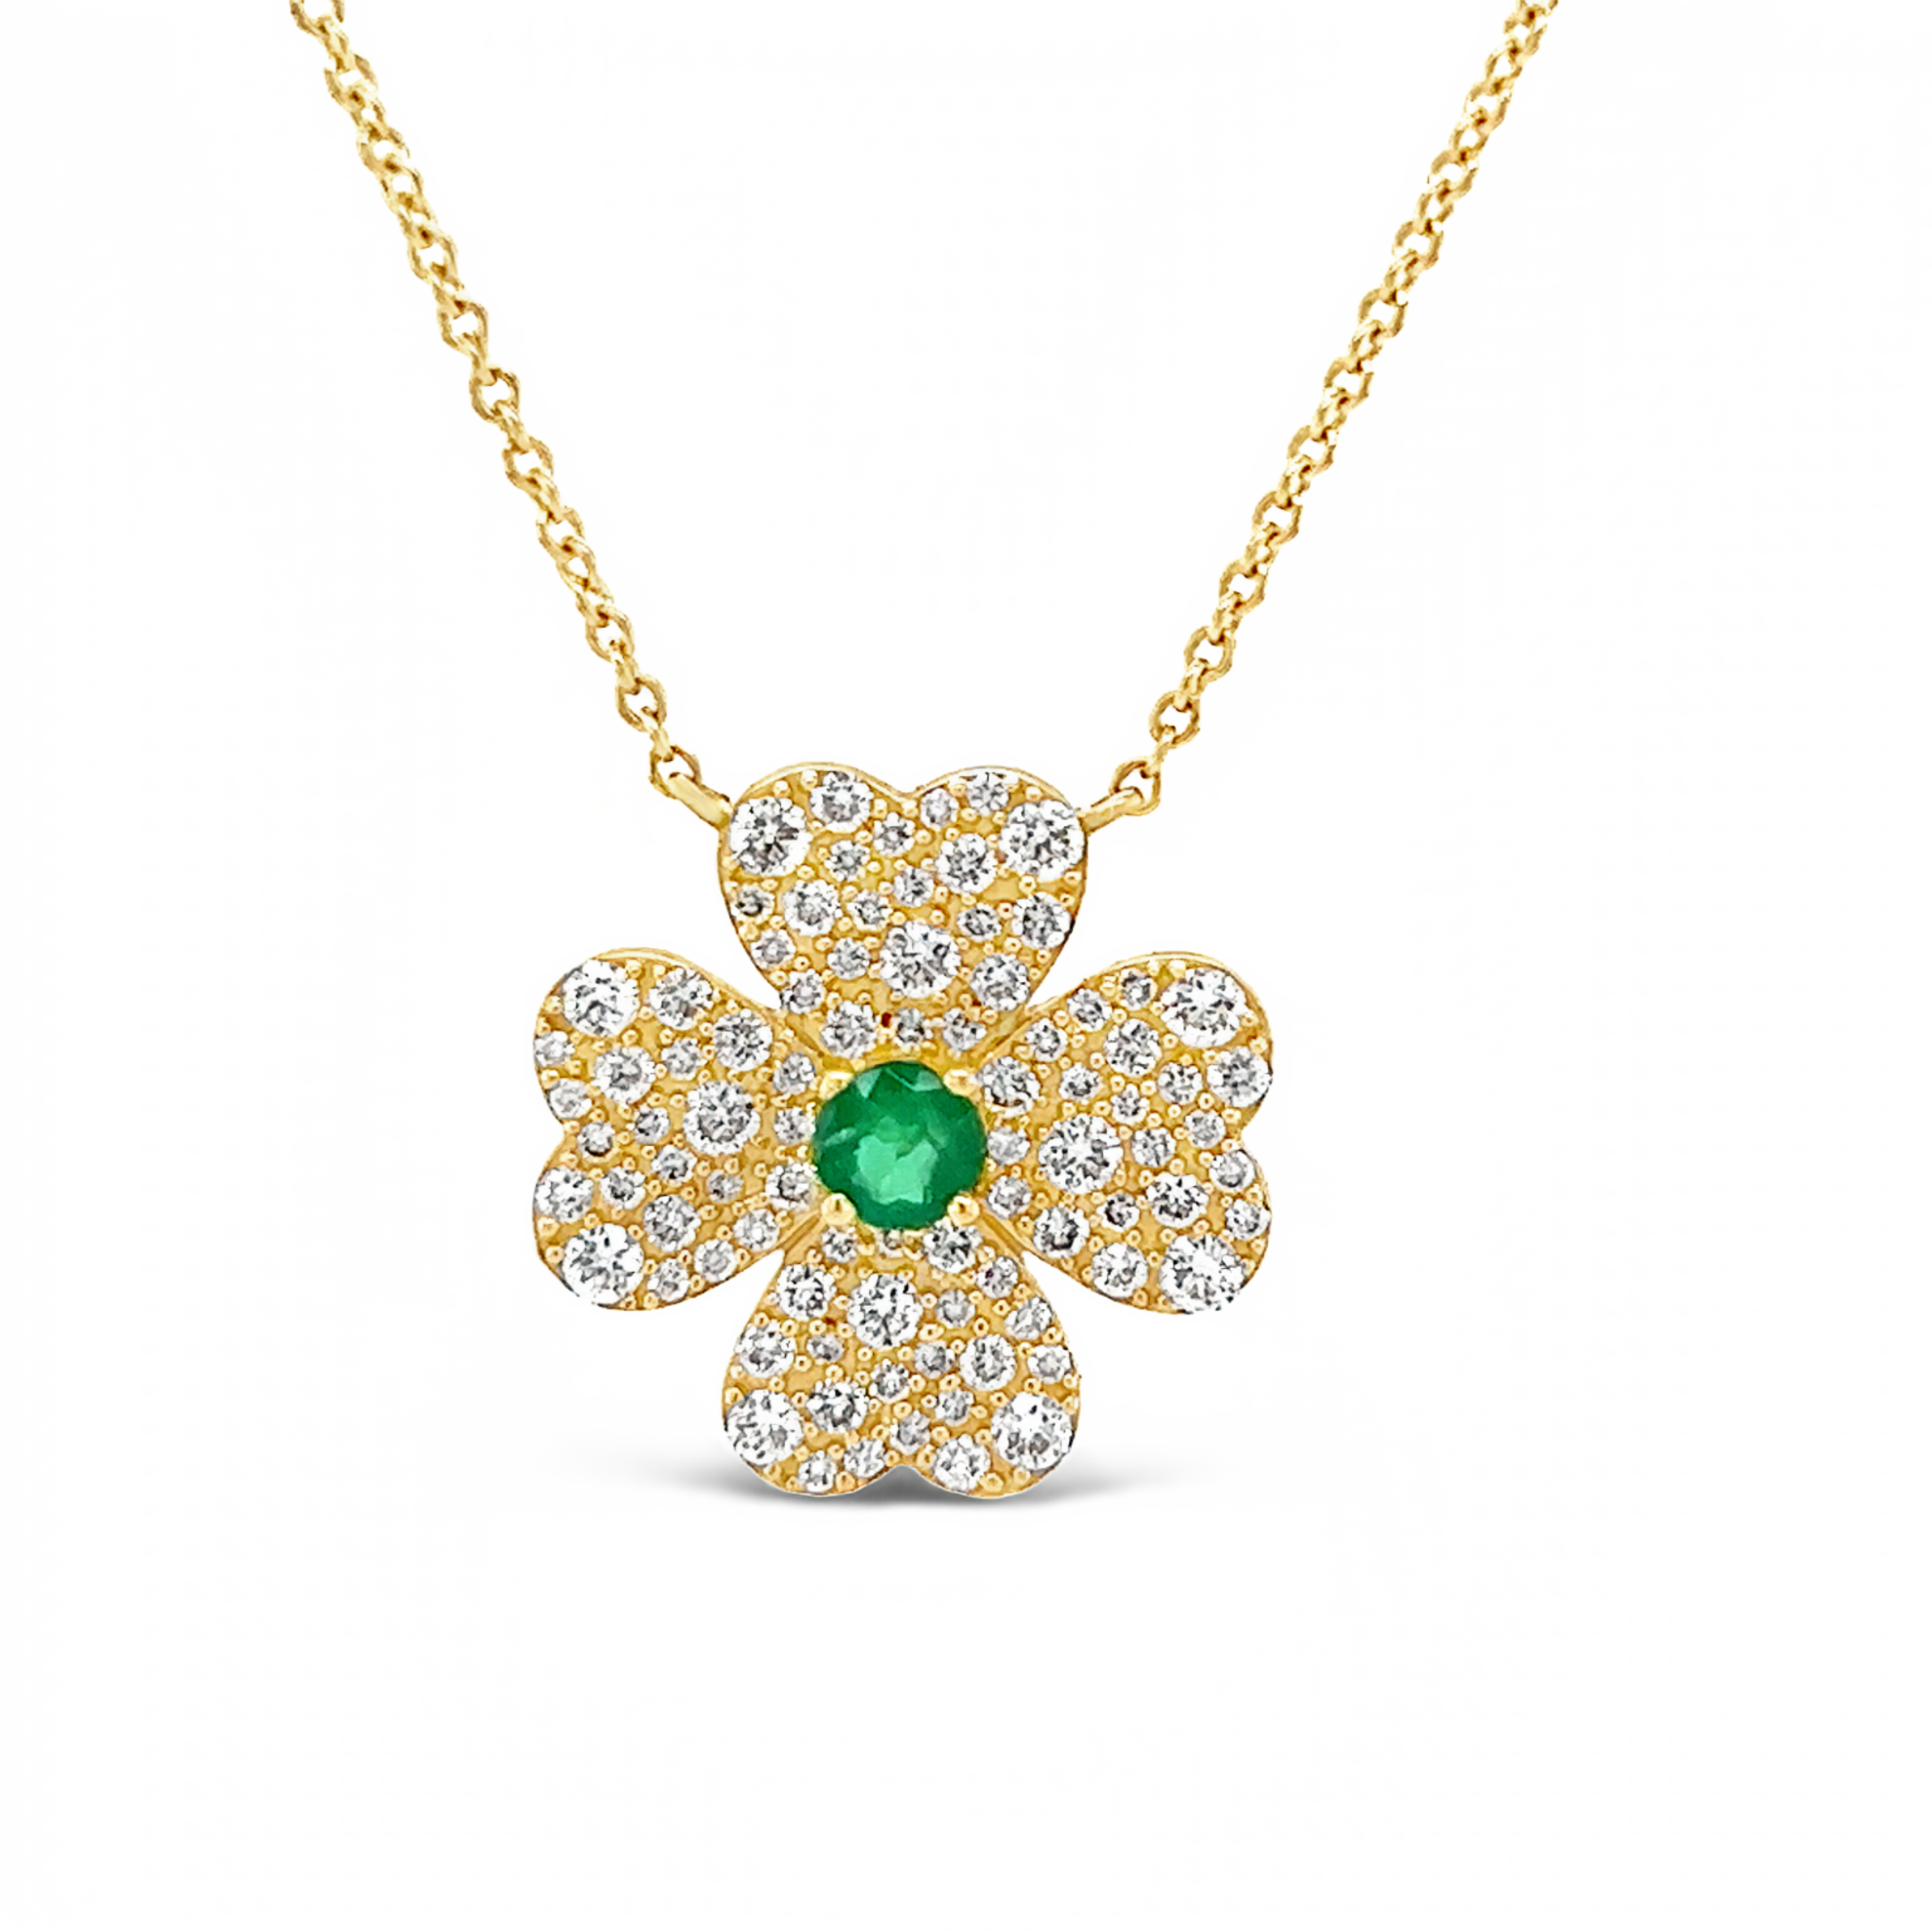 Featured image for “Dazzling Diamond Four Leaf Clover”